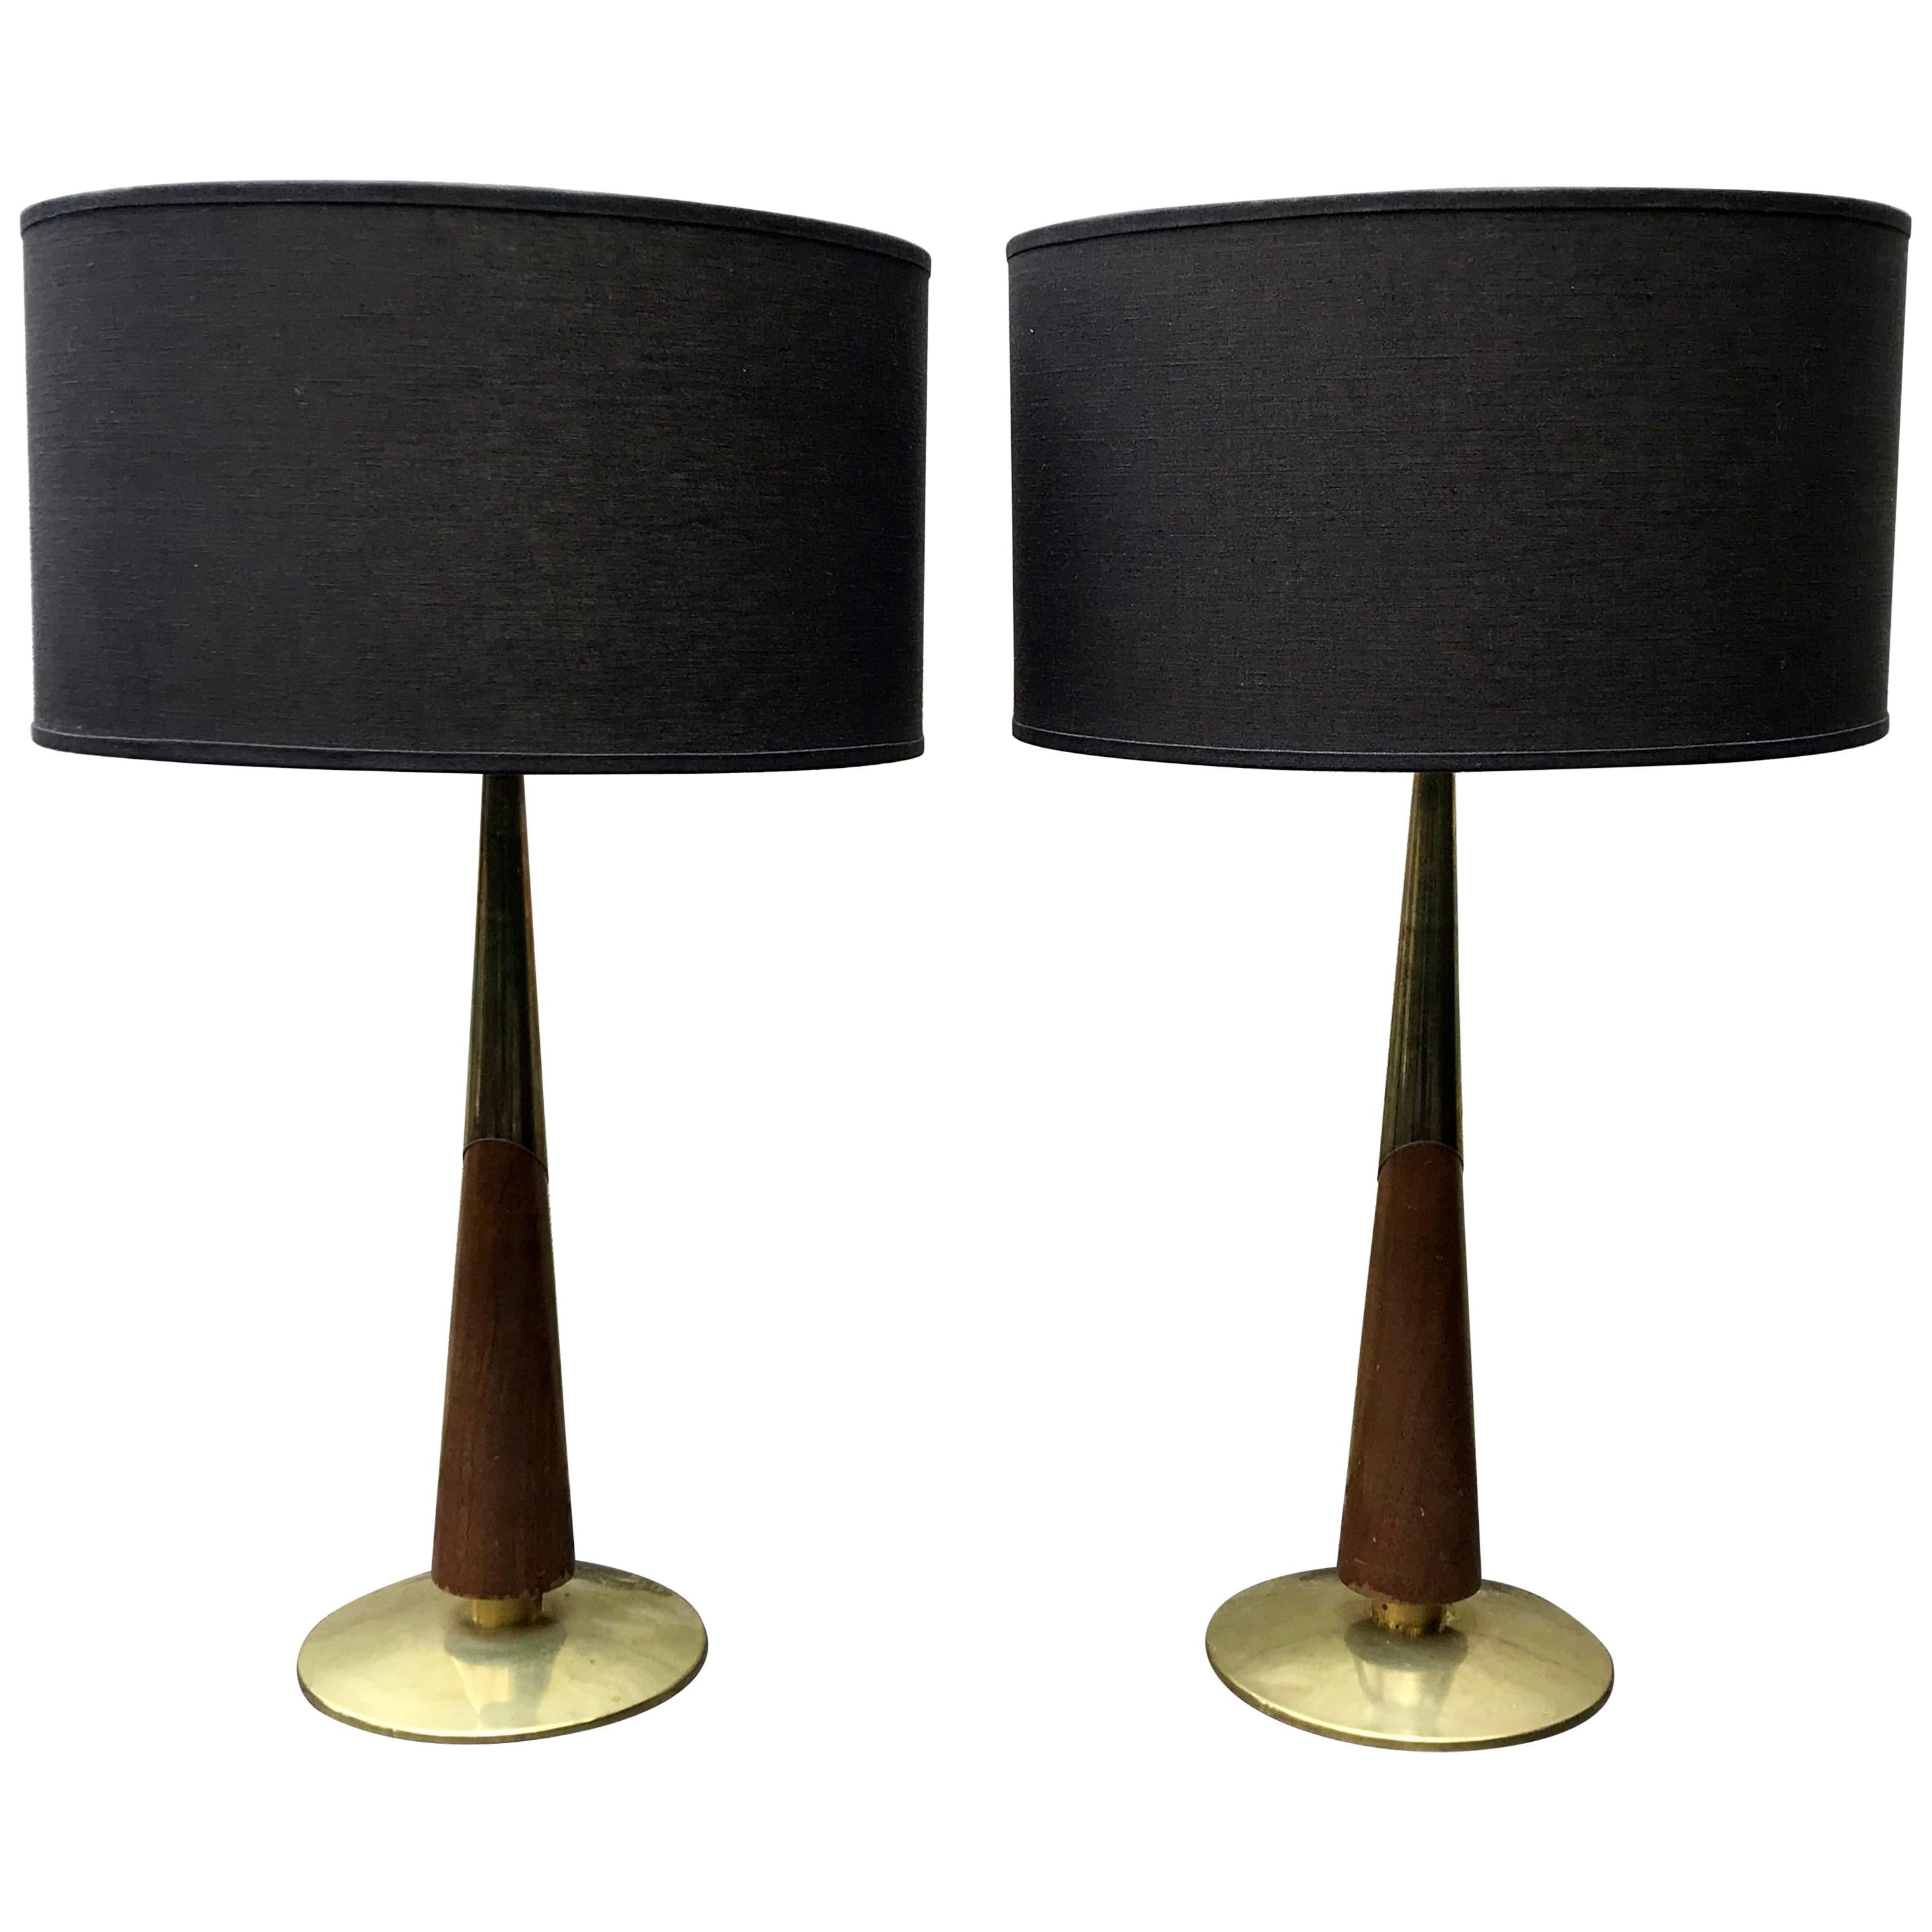 Pair of Midcentury Walnut and Brass Table Lamps by Laurel Lighting, 1950s